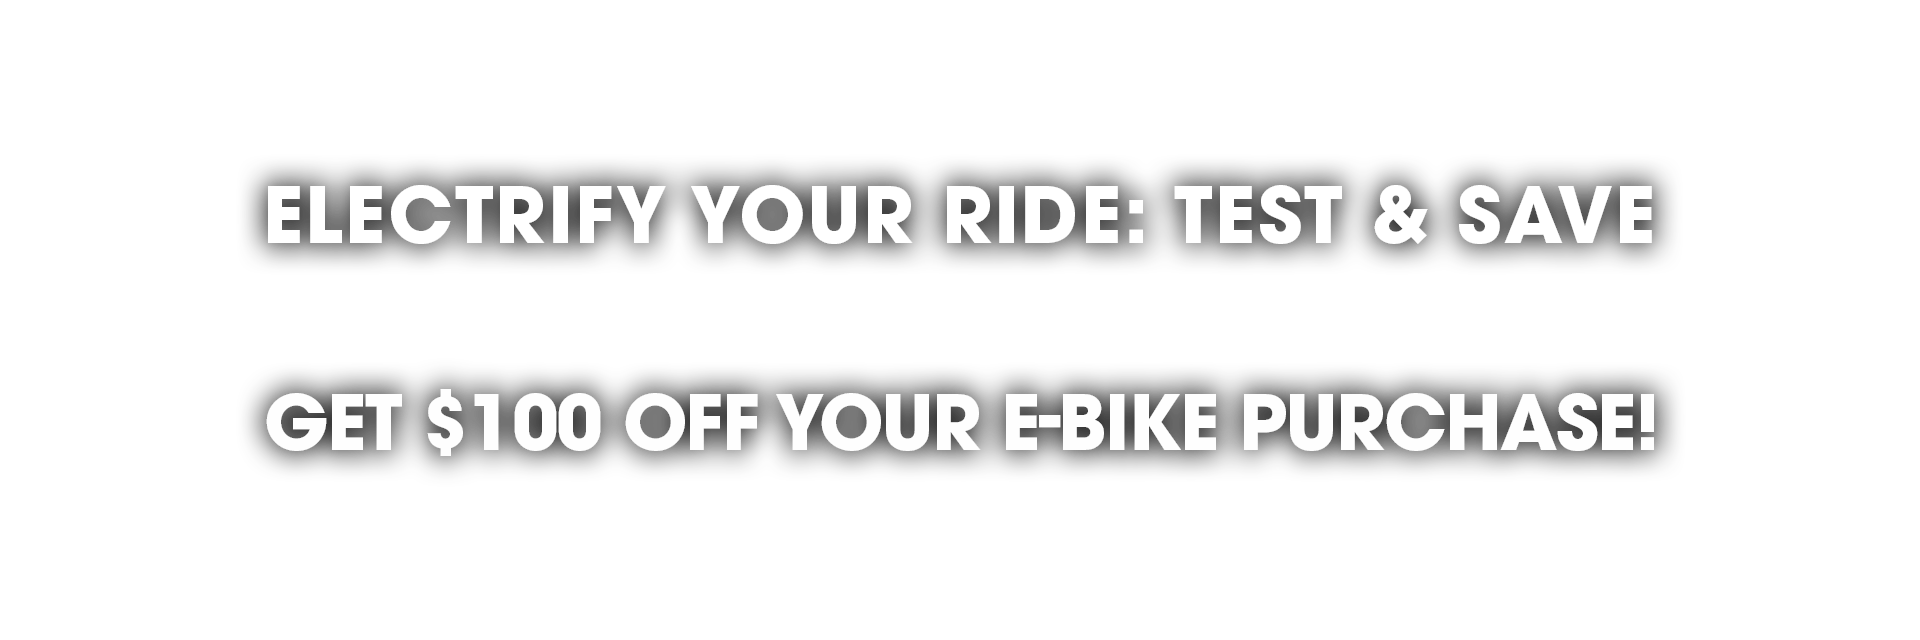 Test Ride E-Bikes and Get $100